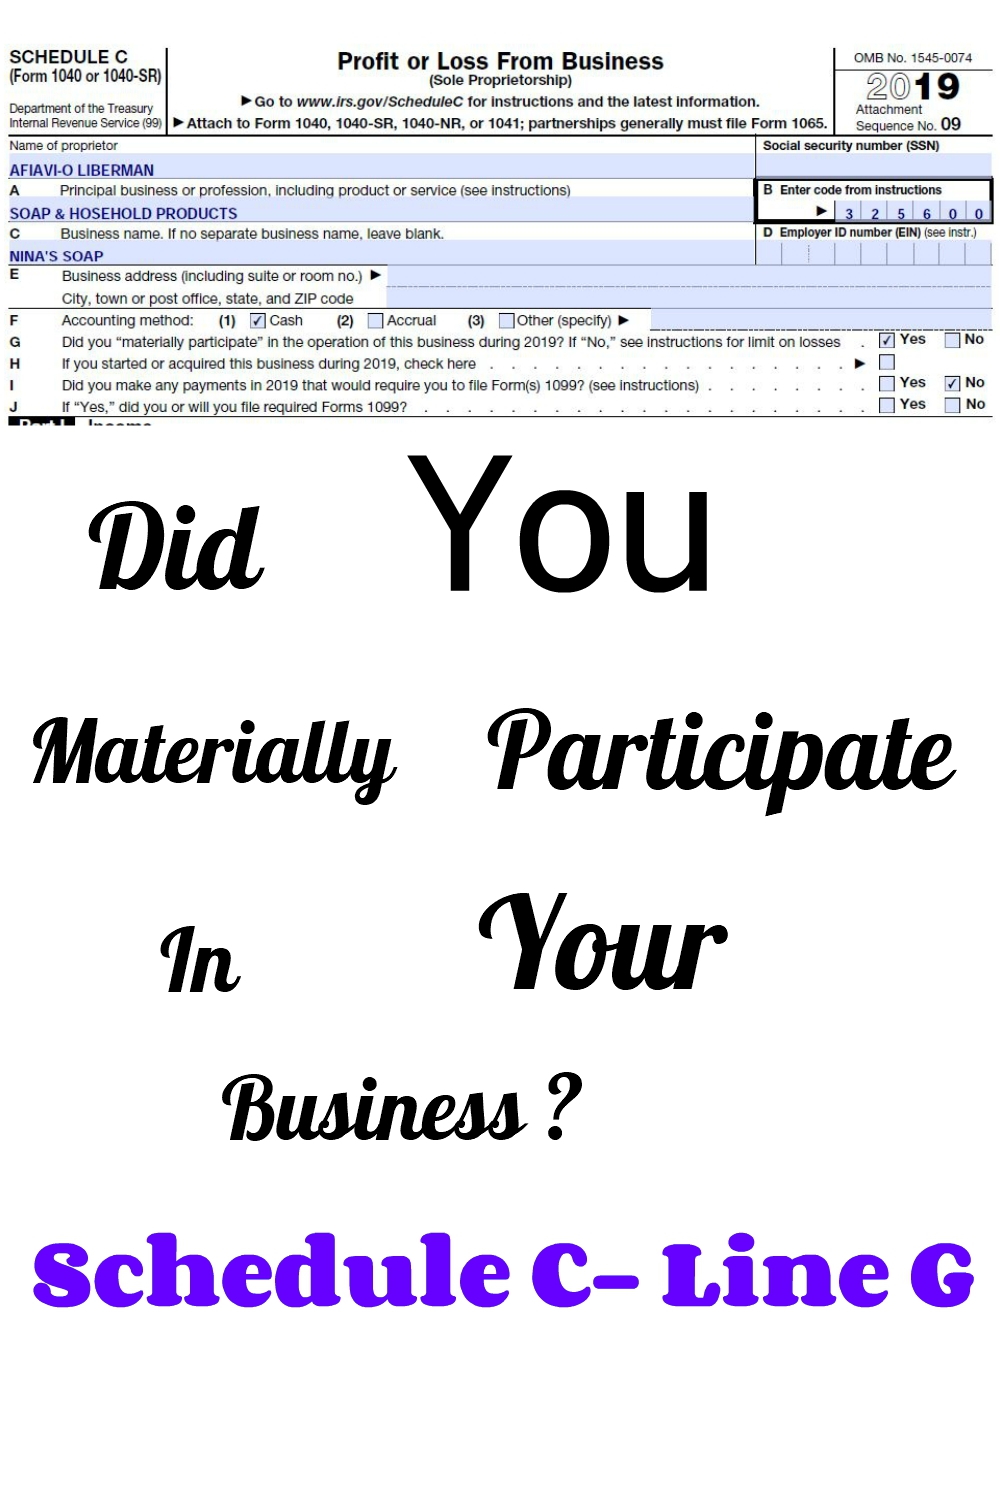 did you materially participate in your business - Schedule C Form 1040